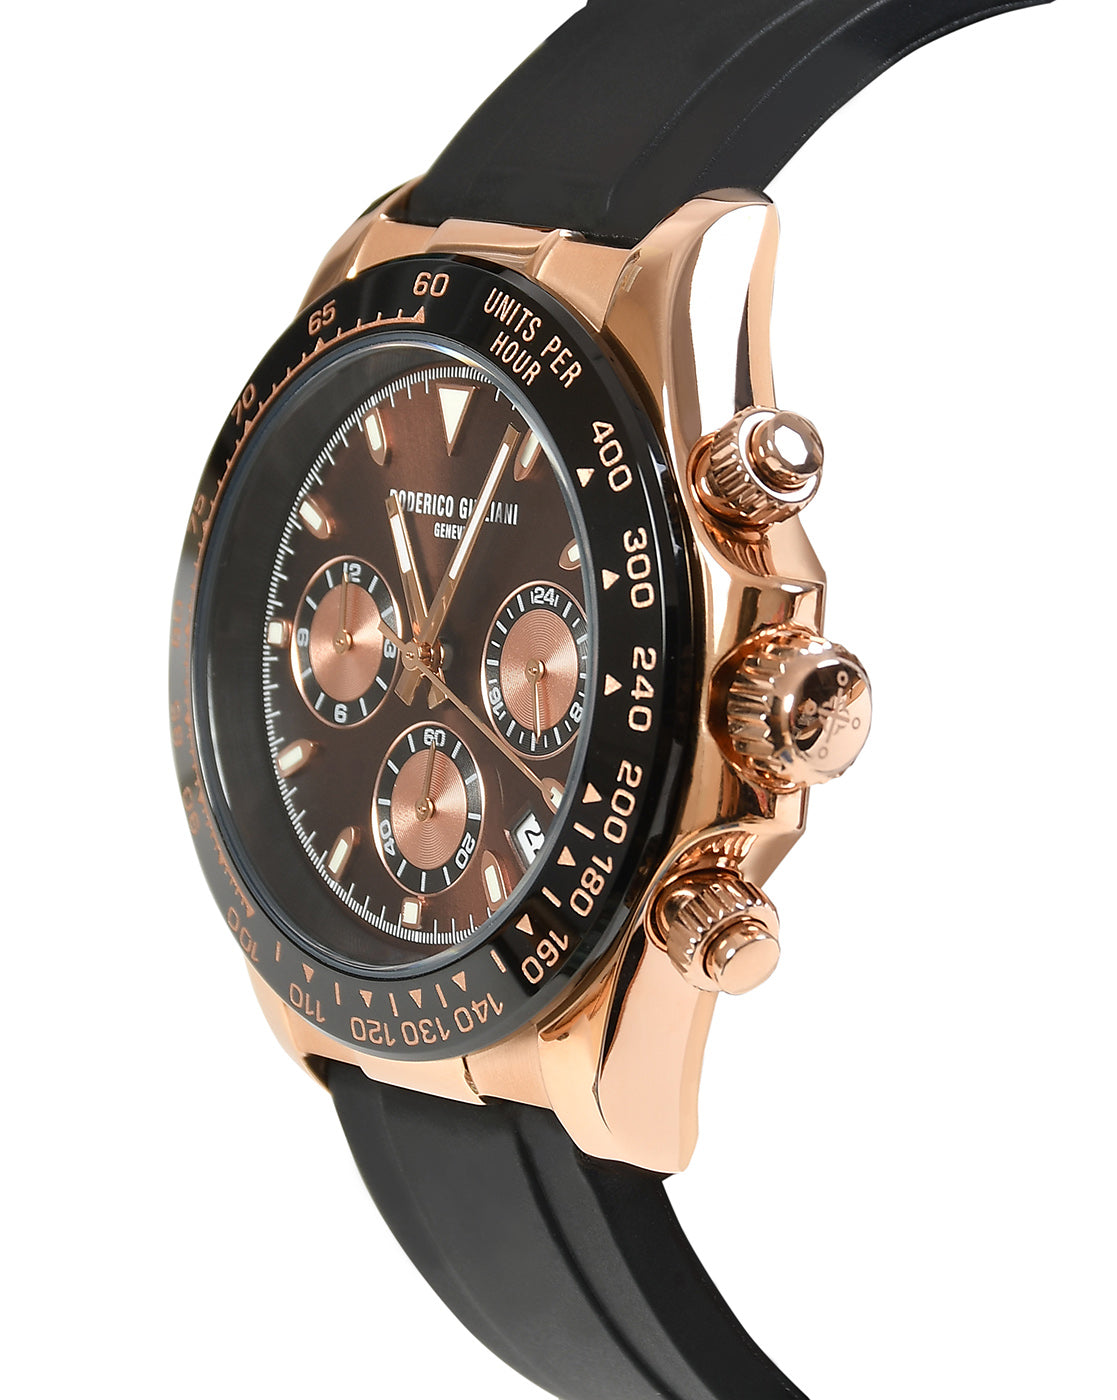 RODERICO GIULIANI ANALOG CHRONOGRAPH ROSE GOLD DIAL ROSE GOLD CASE MEN'S WATCH MSLC-7803